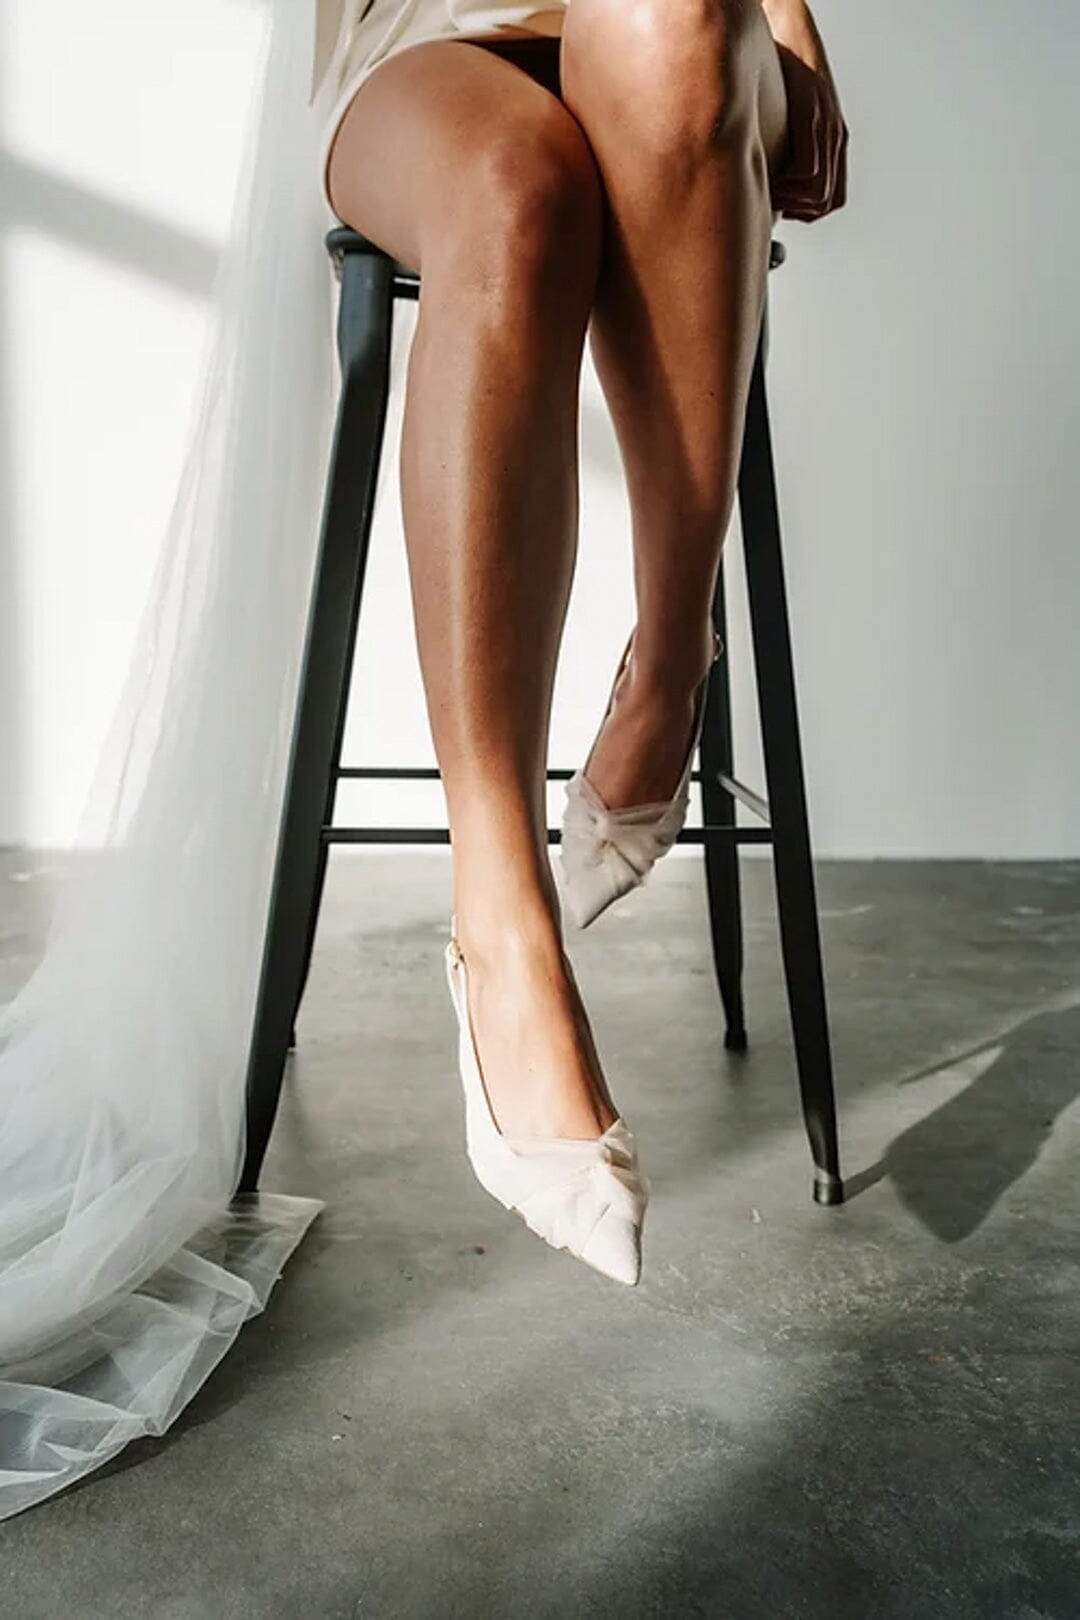 Sling Heels mit Tüll-Schleife – Daisy Ivory | Hello Lovely Shoes